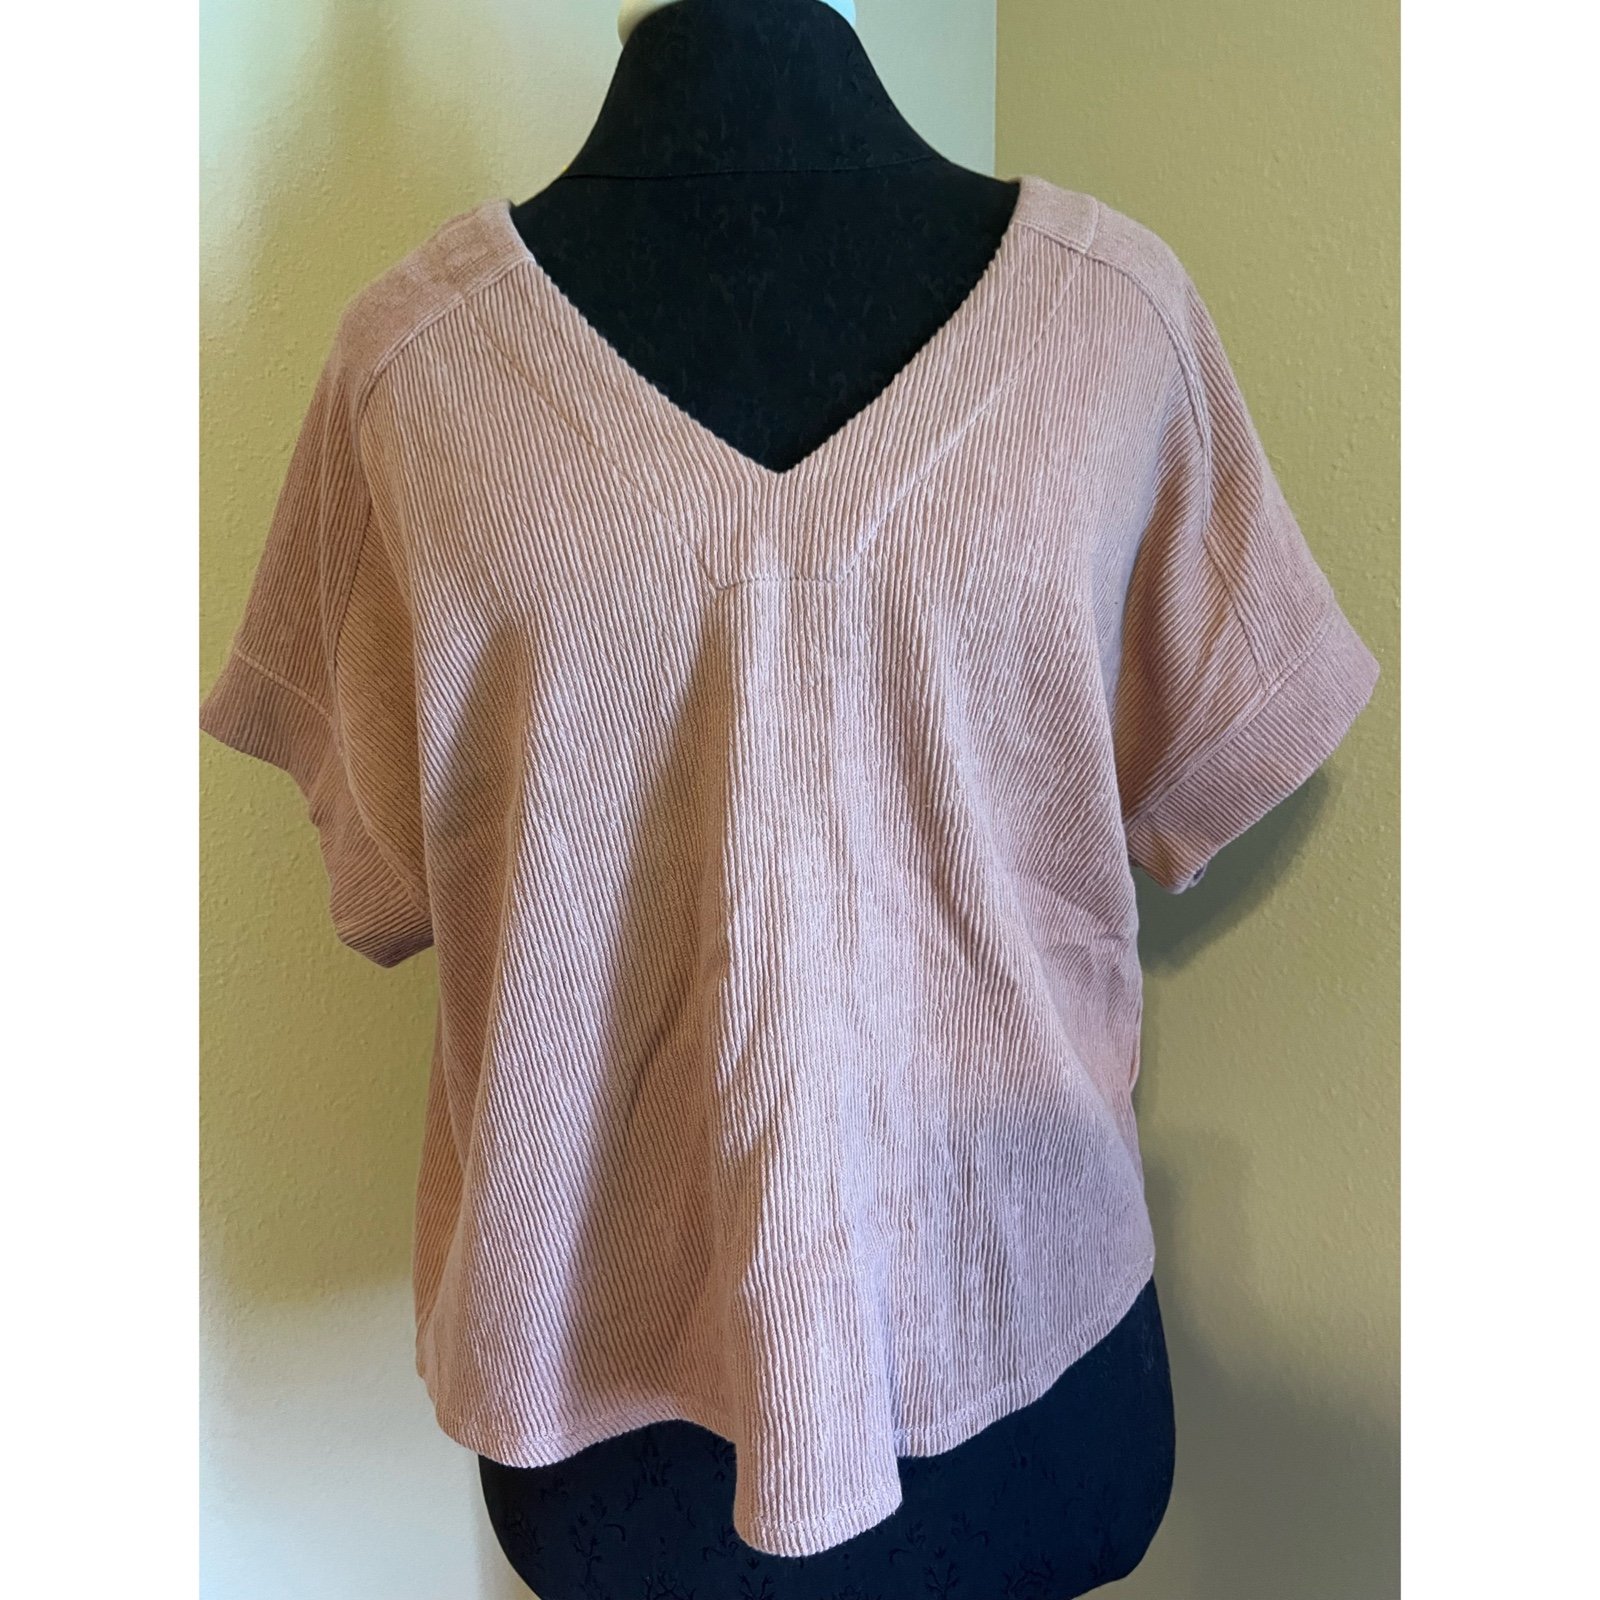 Affordable Madewell ribbed v neck pink mauve blouse top jSgsUsciv just for you